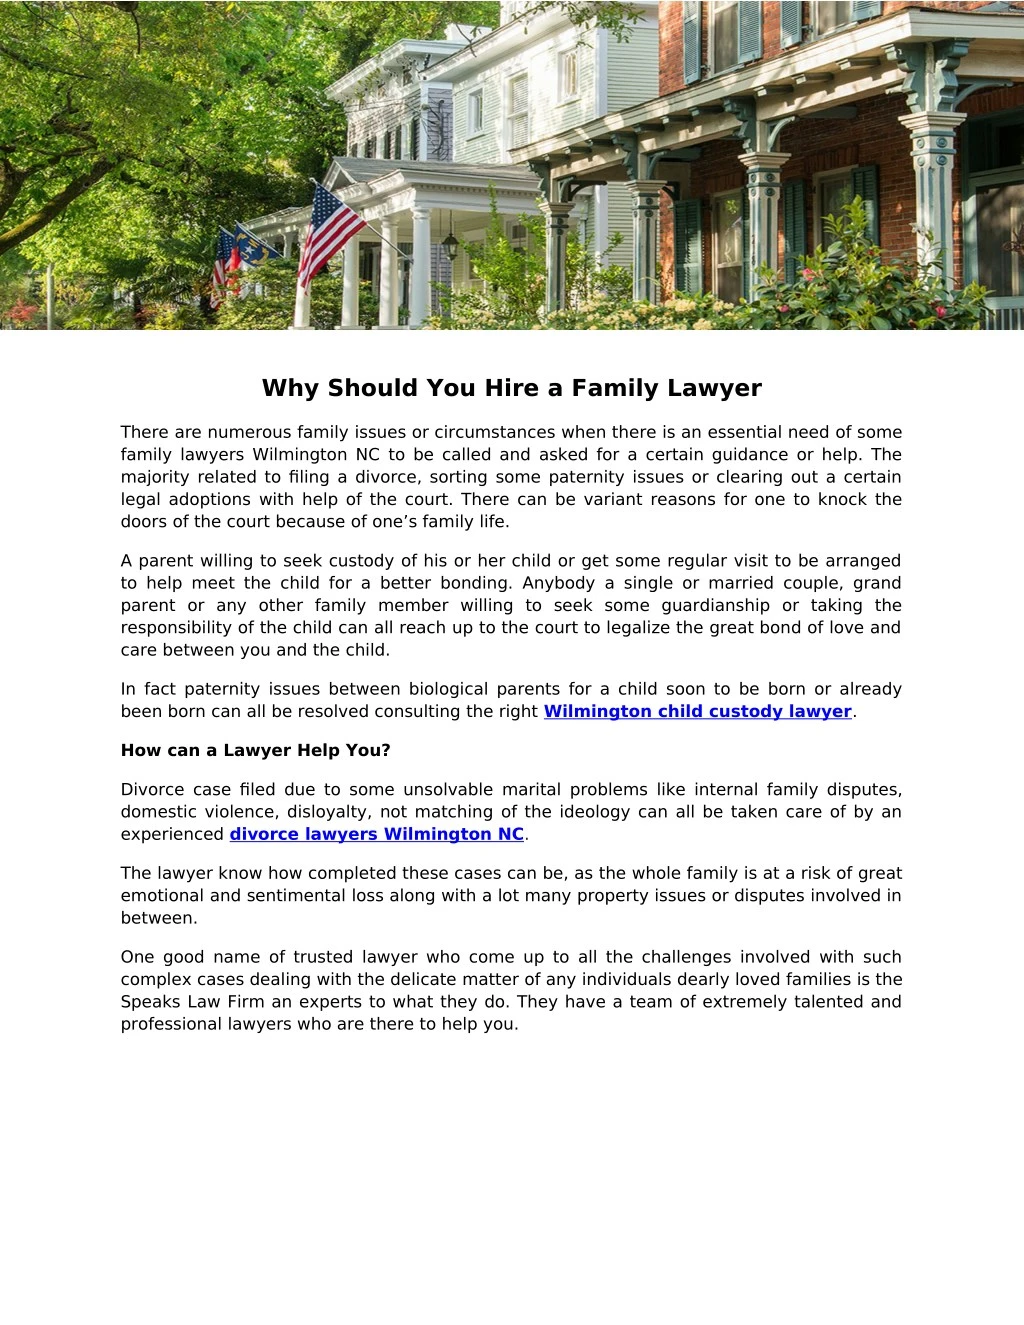 why should you hire a family lawyer